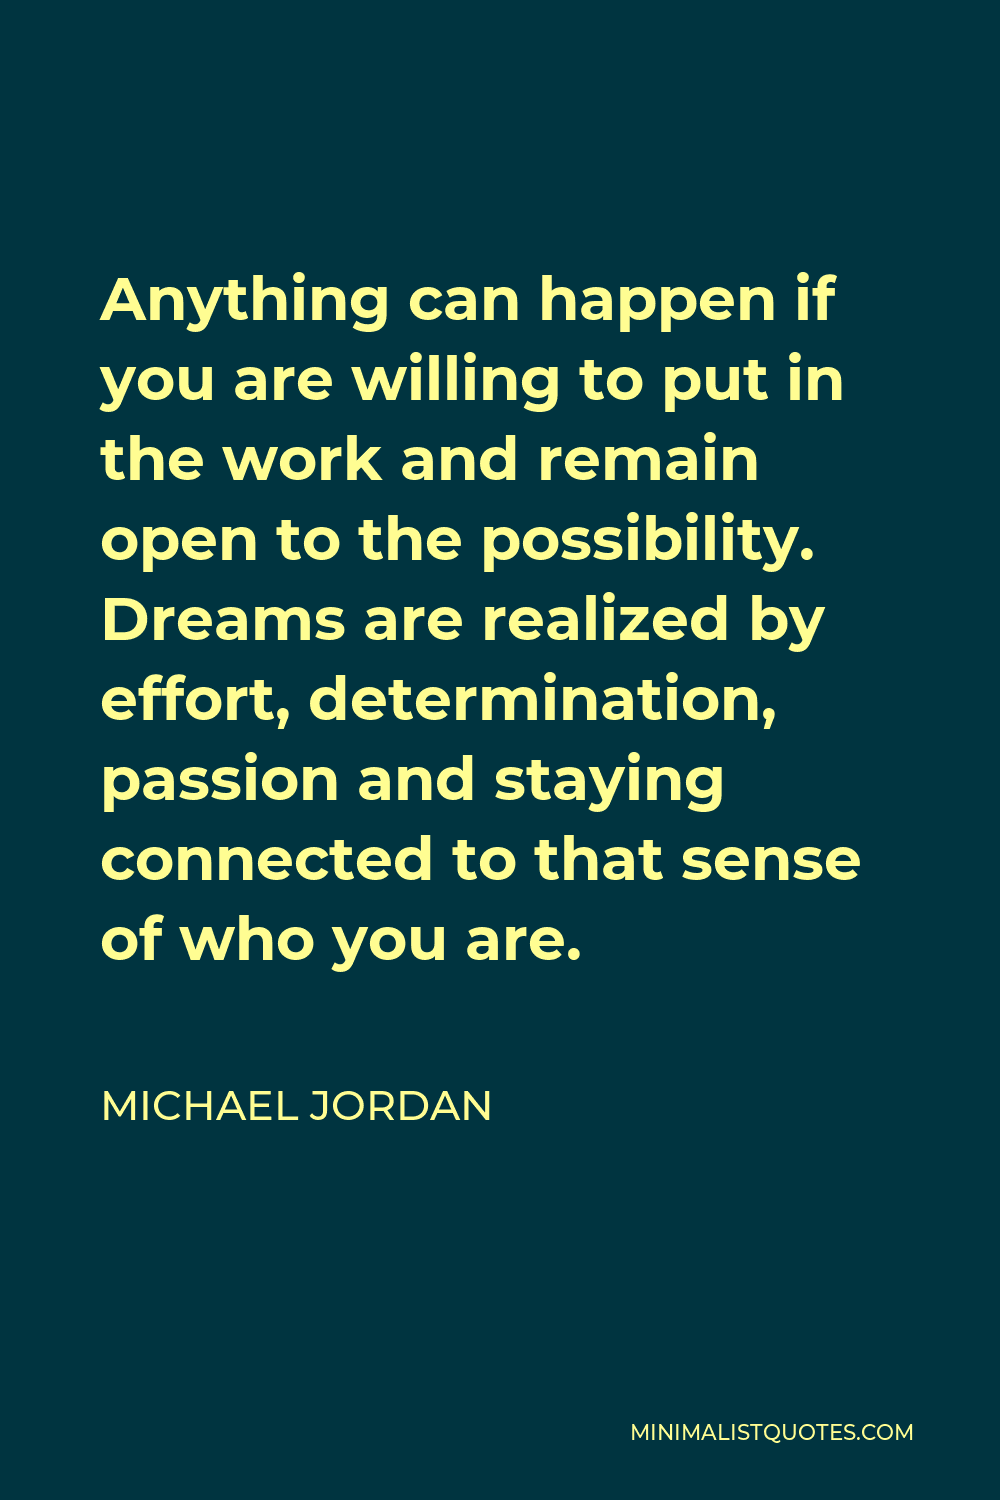 Michael Jordan Quote - Anything can happen if you are willing to put in the work and remain open to the possibility. Dreams are realized by effort, determination, passion and staying connected to that sense of who you are.